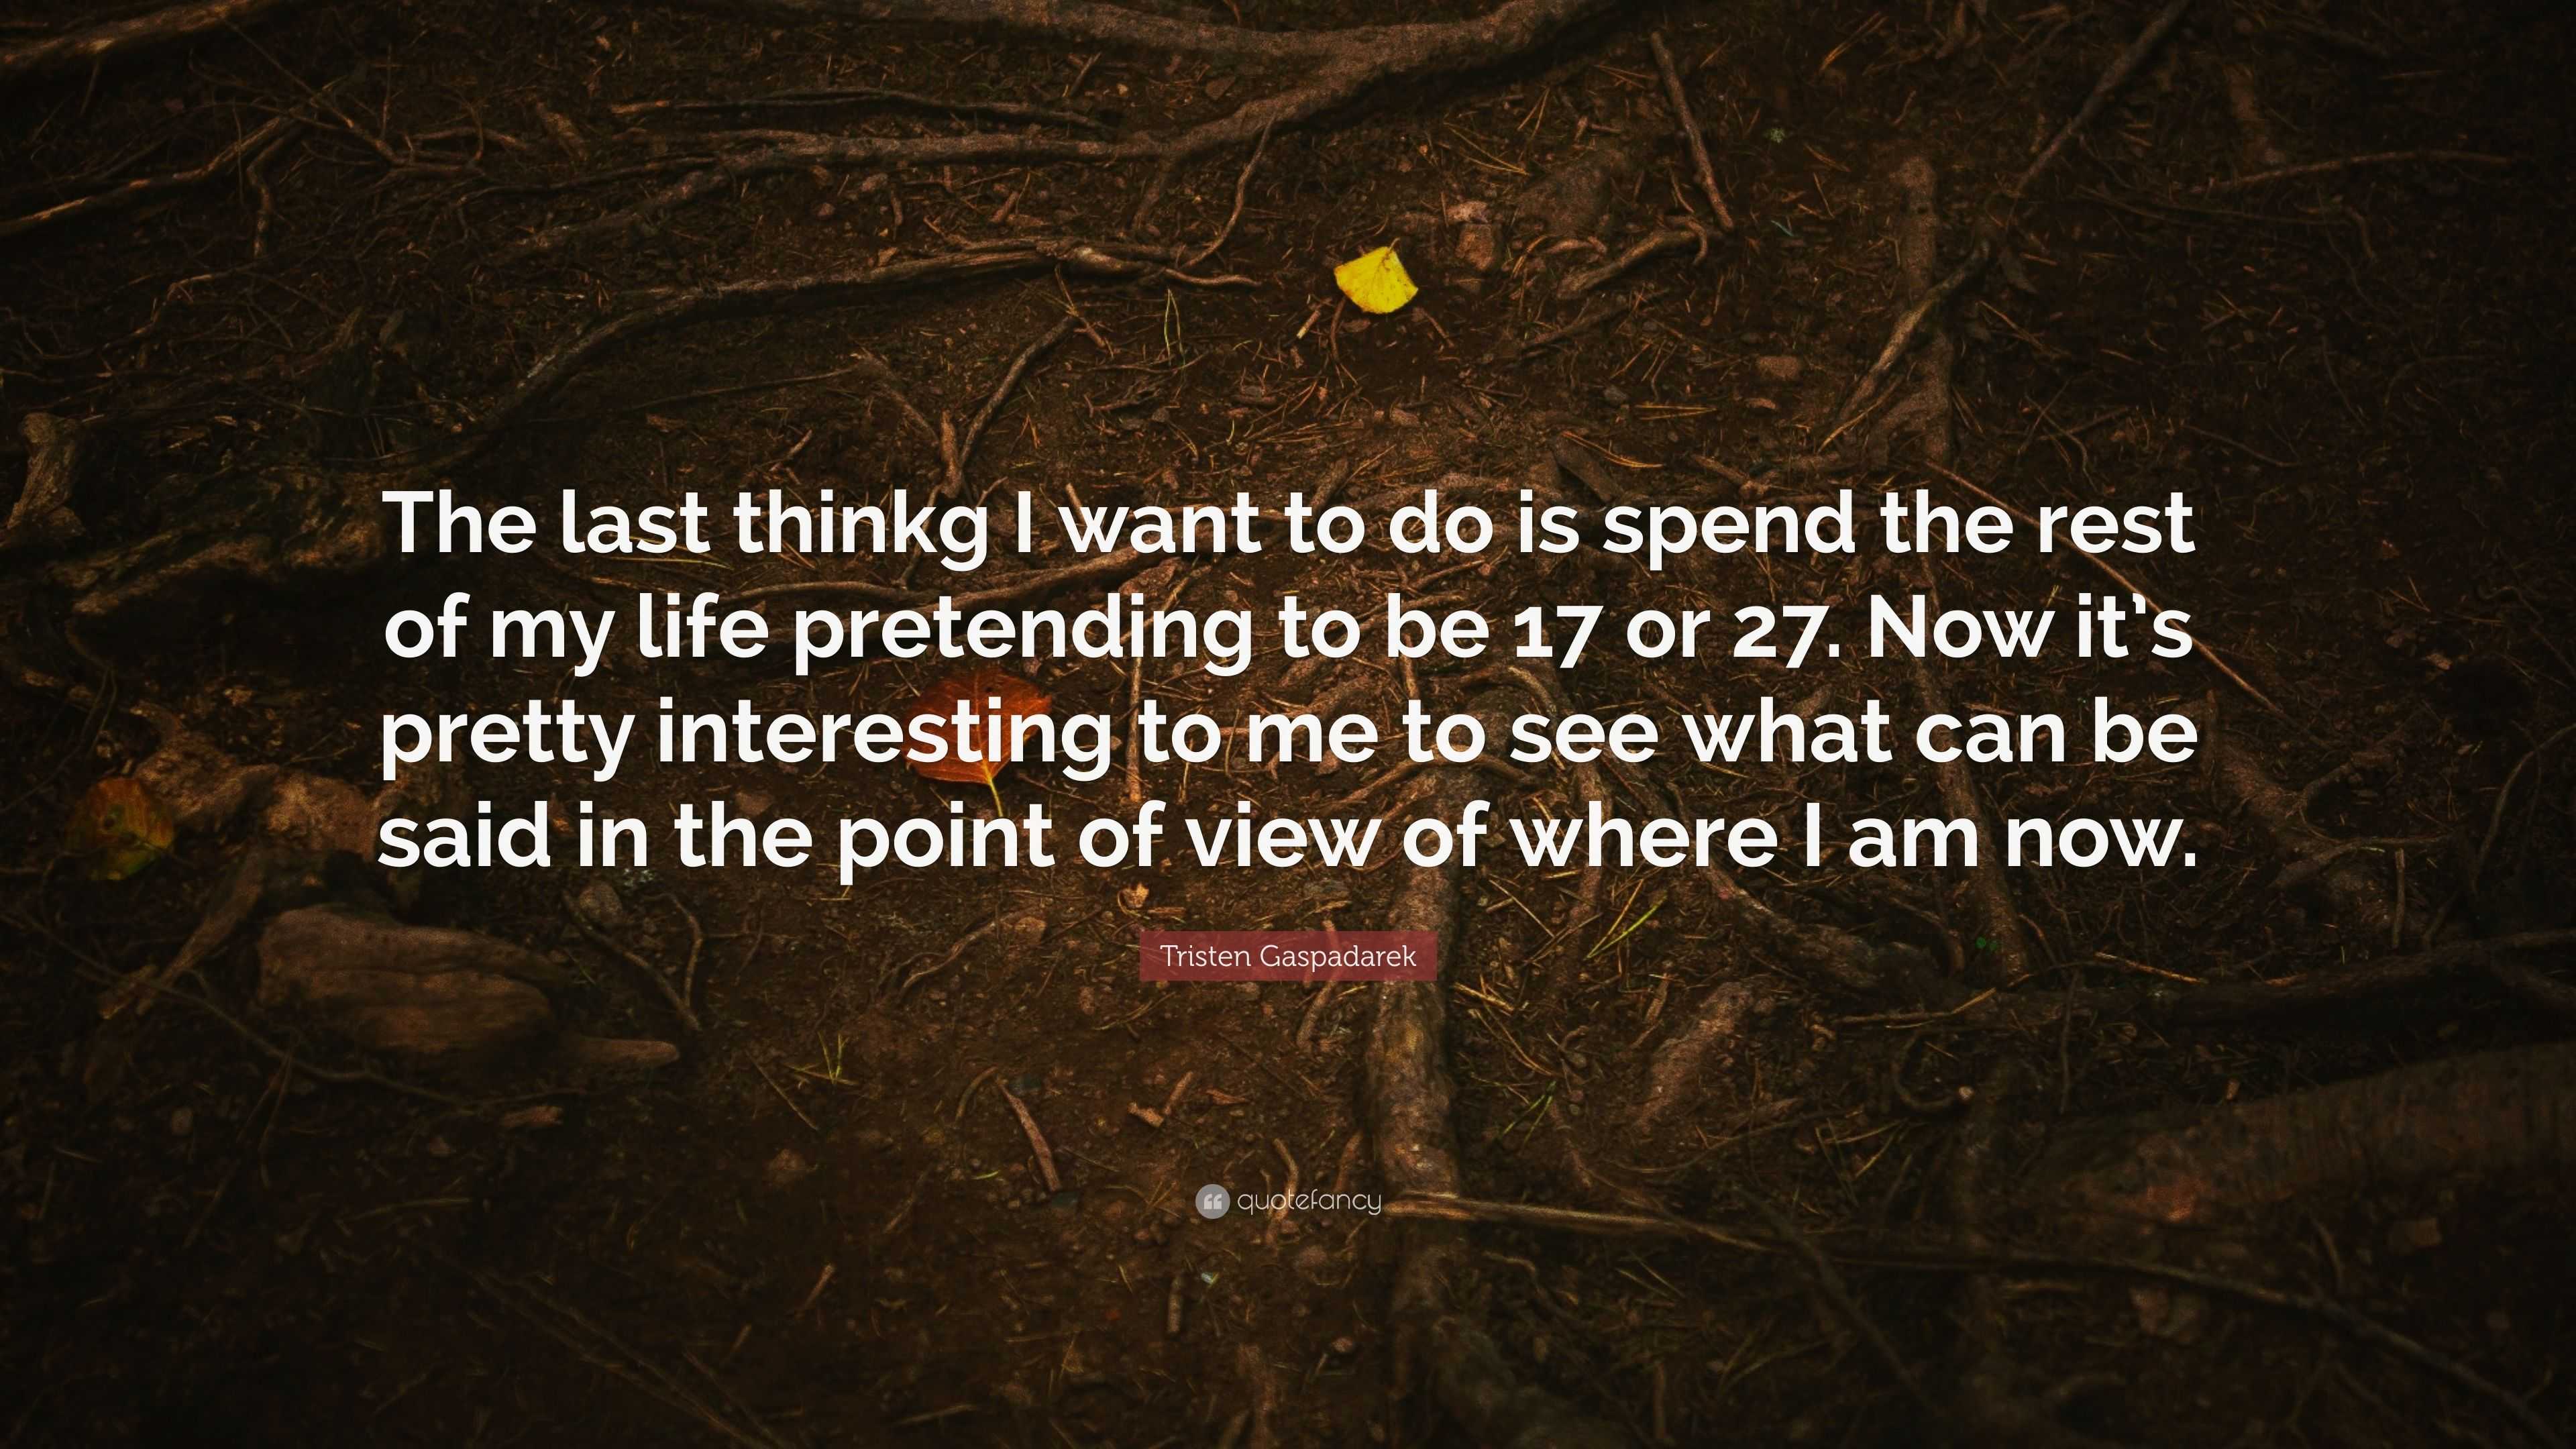 Tristen Gaspadarek Quote: “The last thinkg I want to do is spend the ...